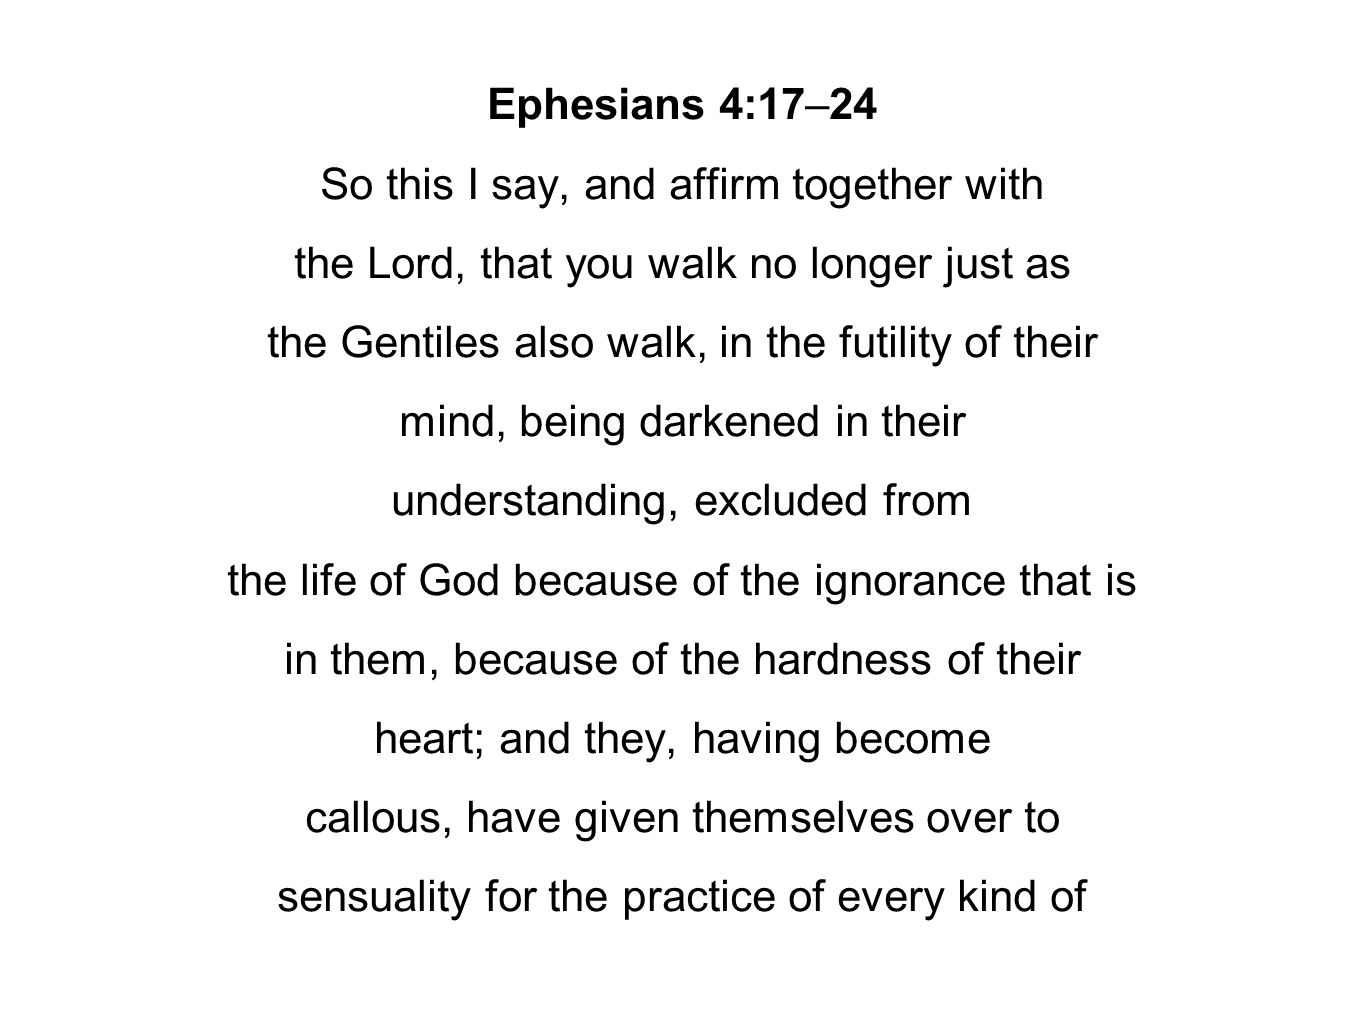 Ephesians 4:17–24 So this I say, and affirm together with the Lord, that you walk no longer just as the Gentiles also walk, in the futility of their mind, being darkened in their understanding, excluded from the life of God because of the ignorance that is in them, because of the hardness of their heart; and they, having become callous, have given themselves over to sensuality for the practice of every kind of